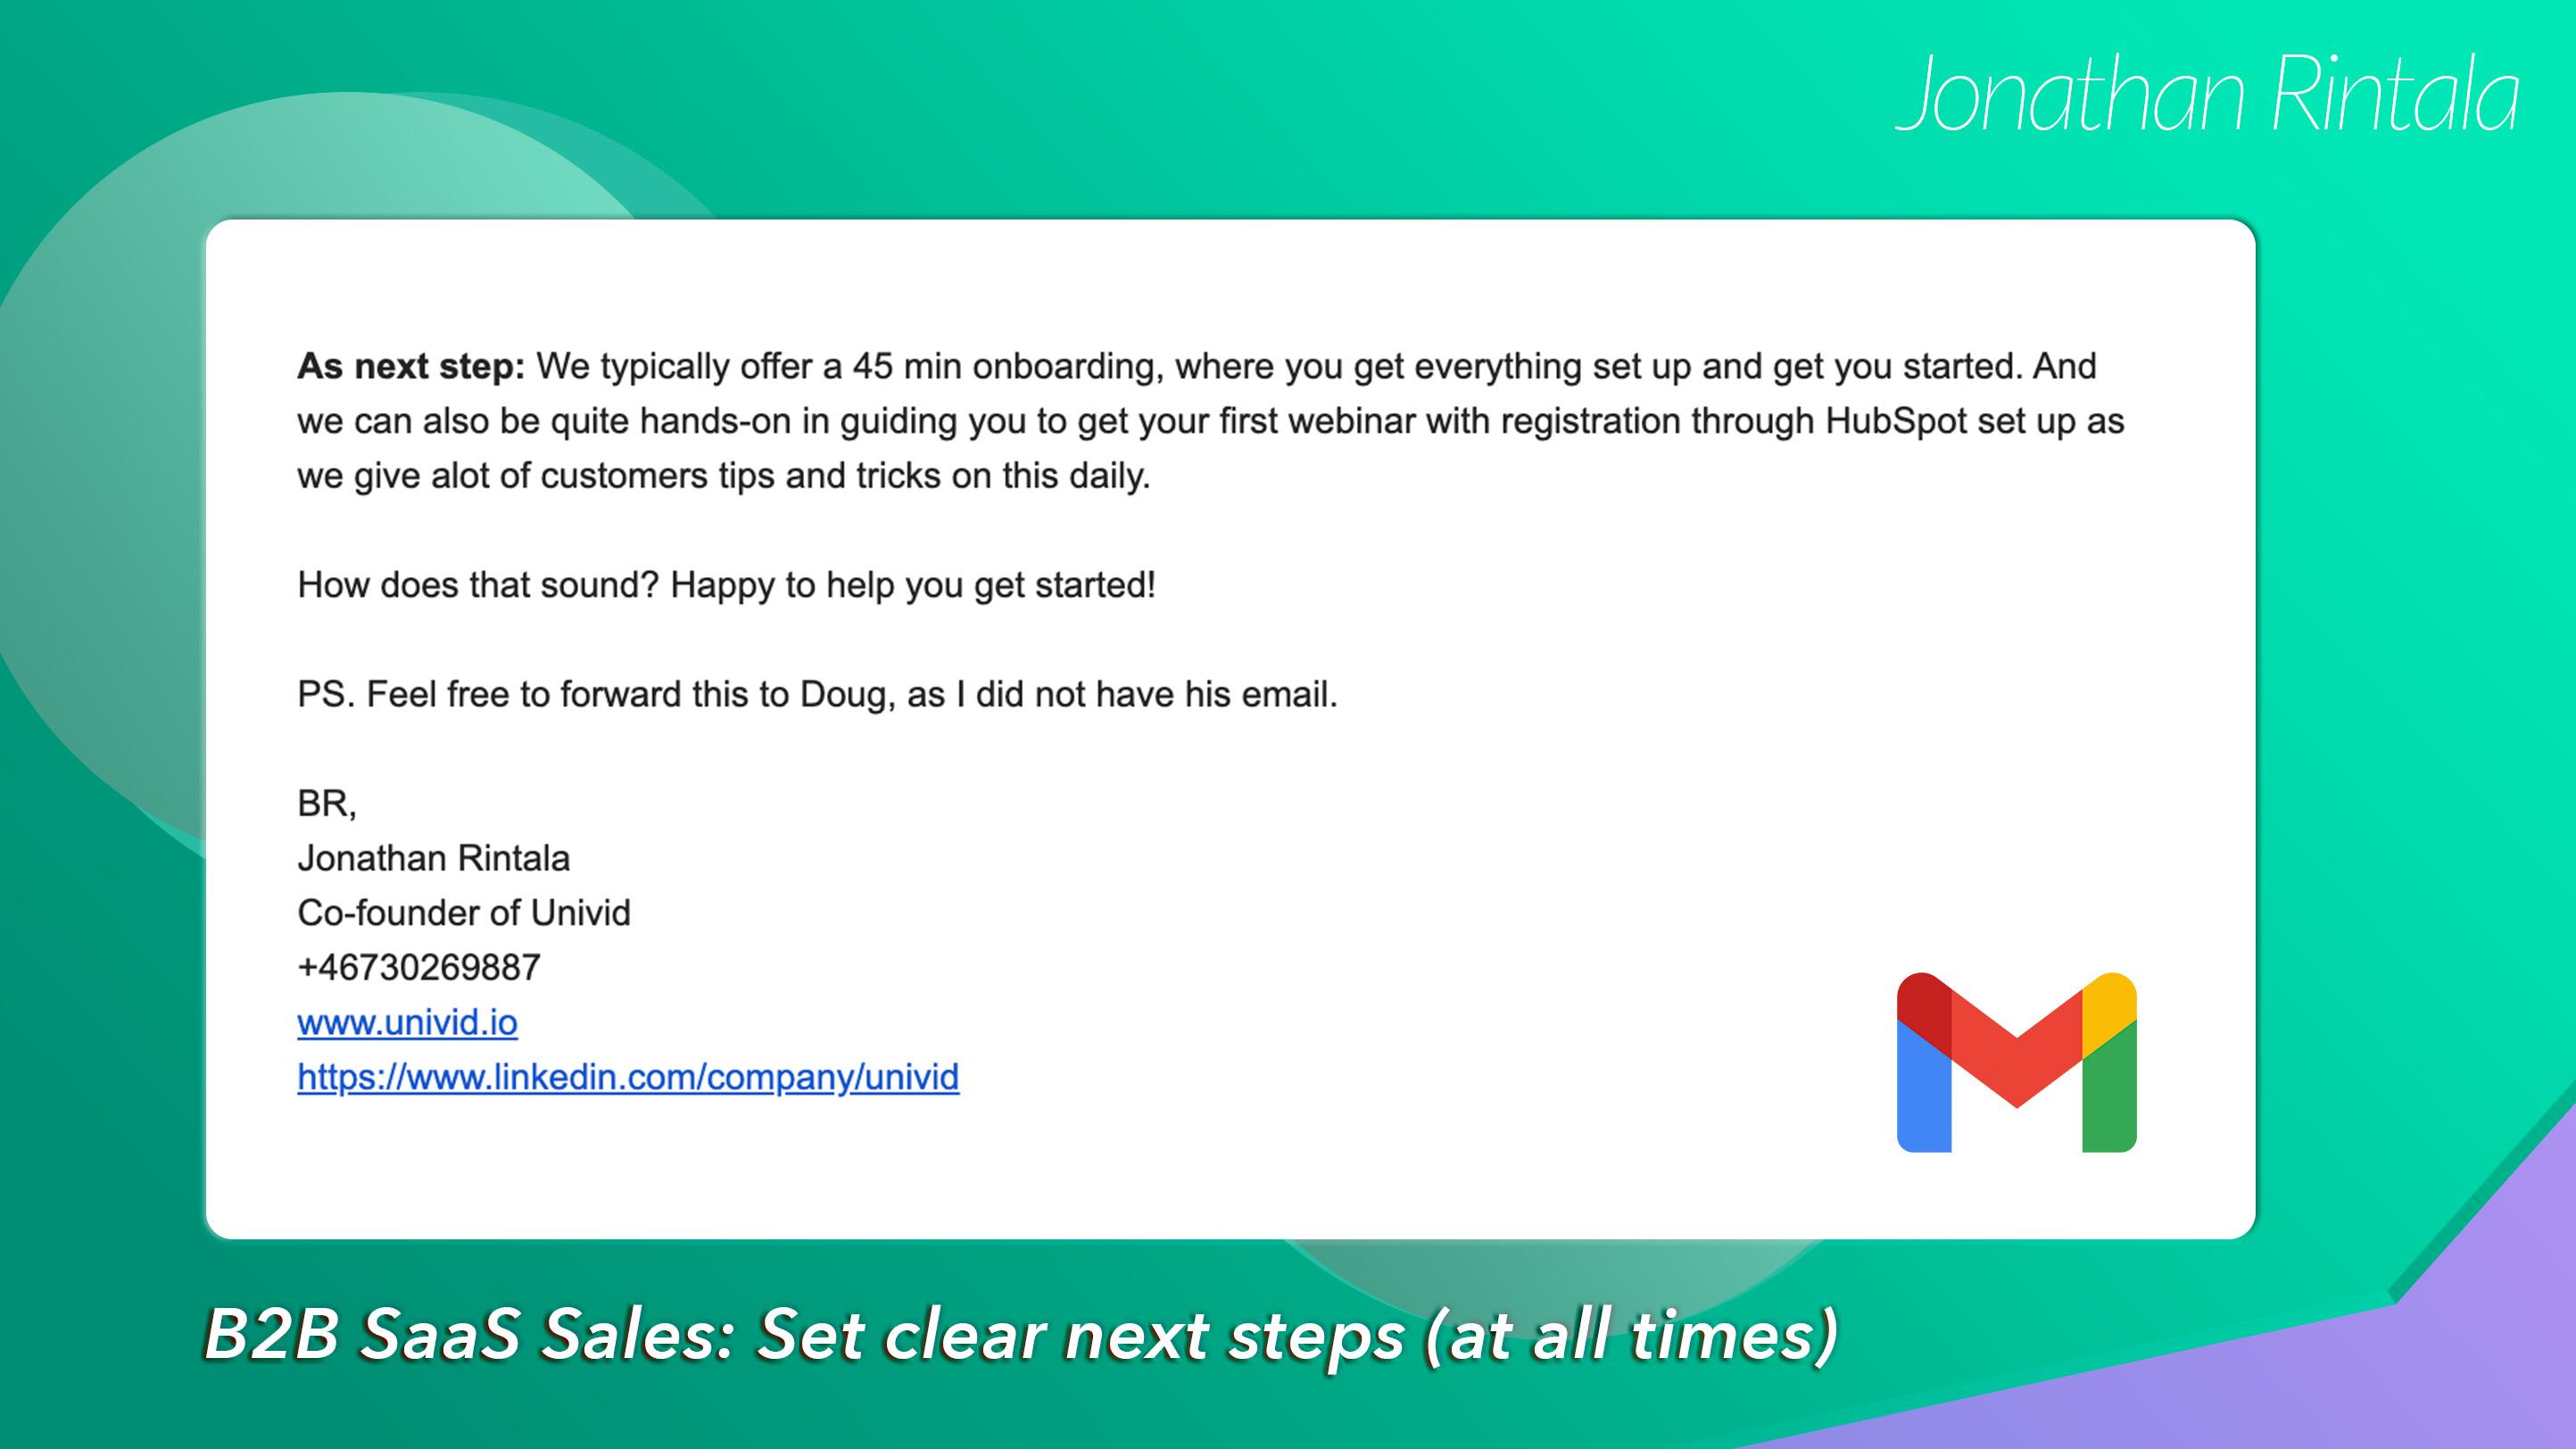 B2B SaaS Sales: Set clear next steps in follow-up email